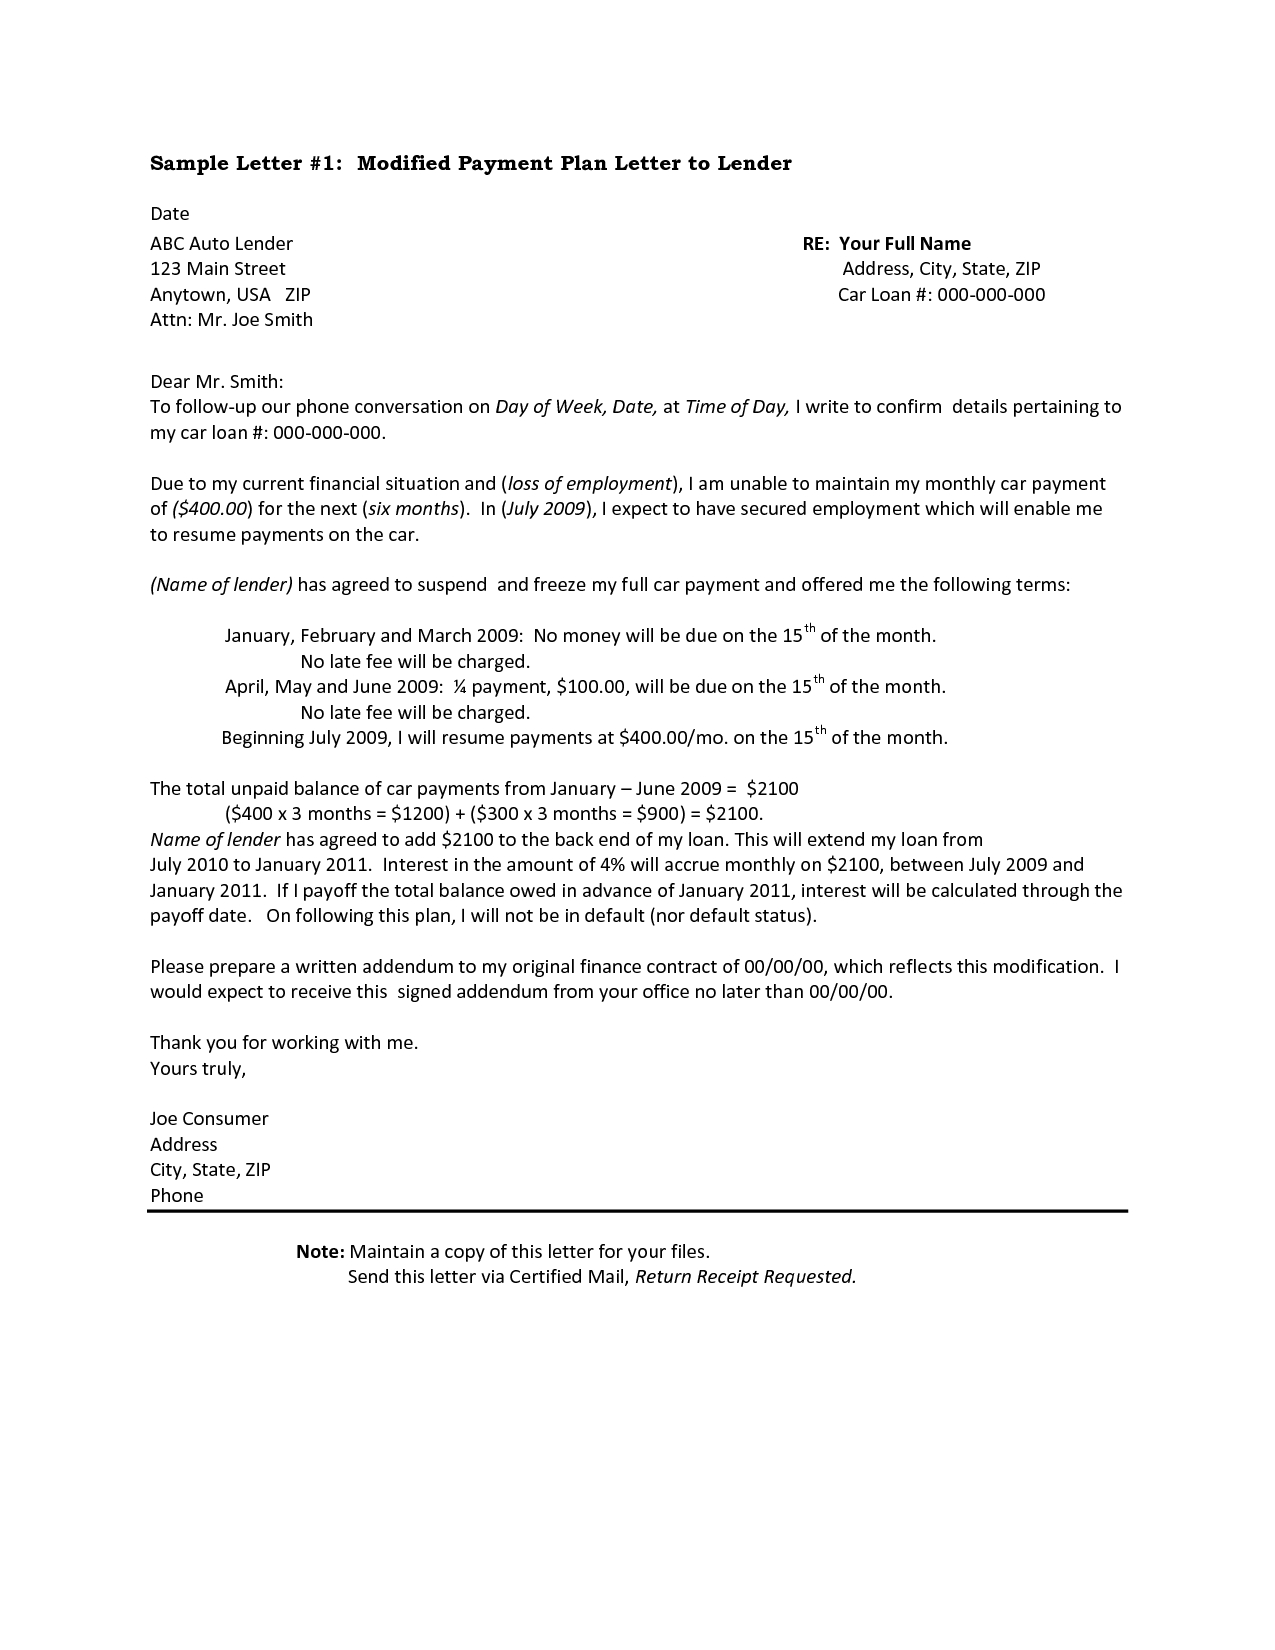 car repossession letter template Collection-24 images of voluntary repossession letter template kpopped 10-o